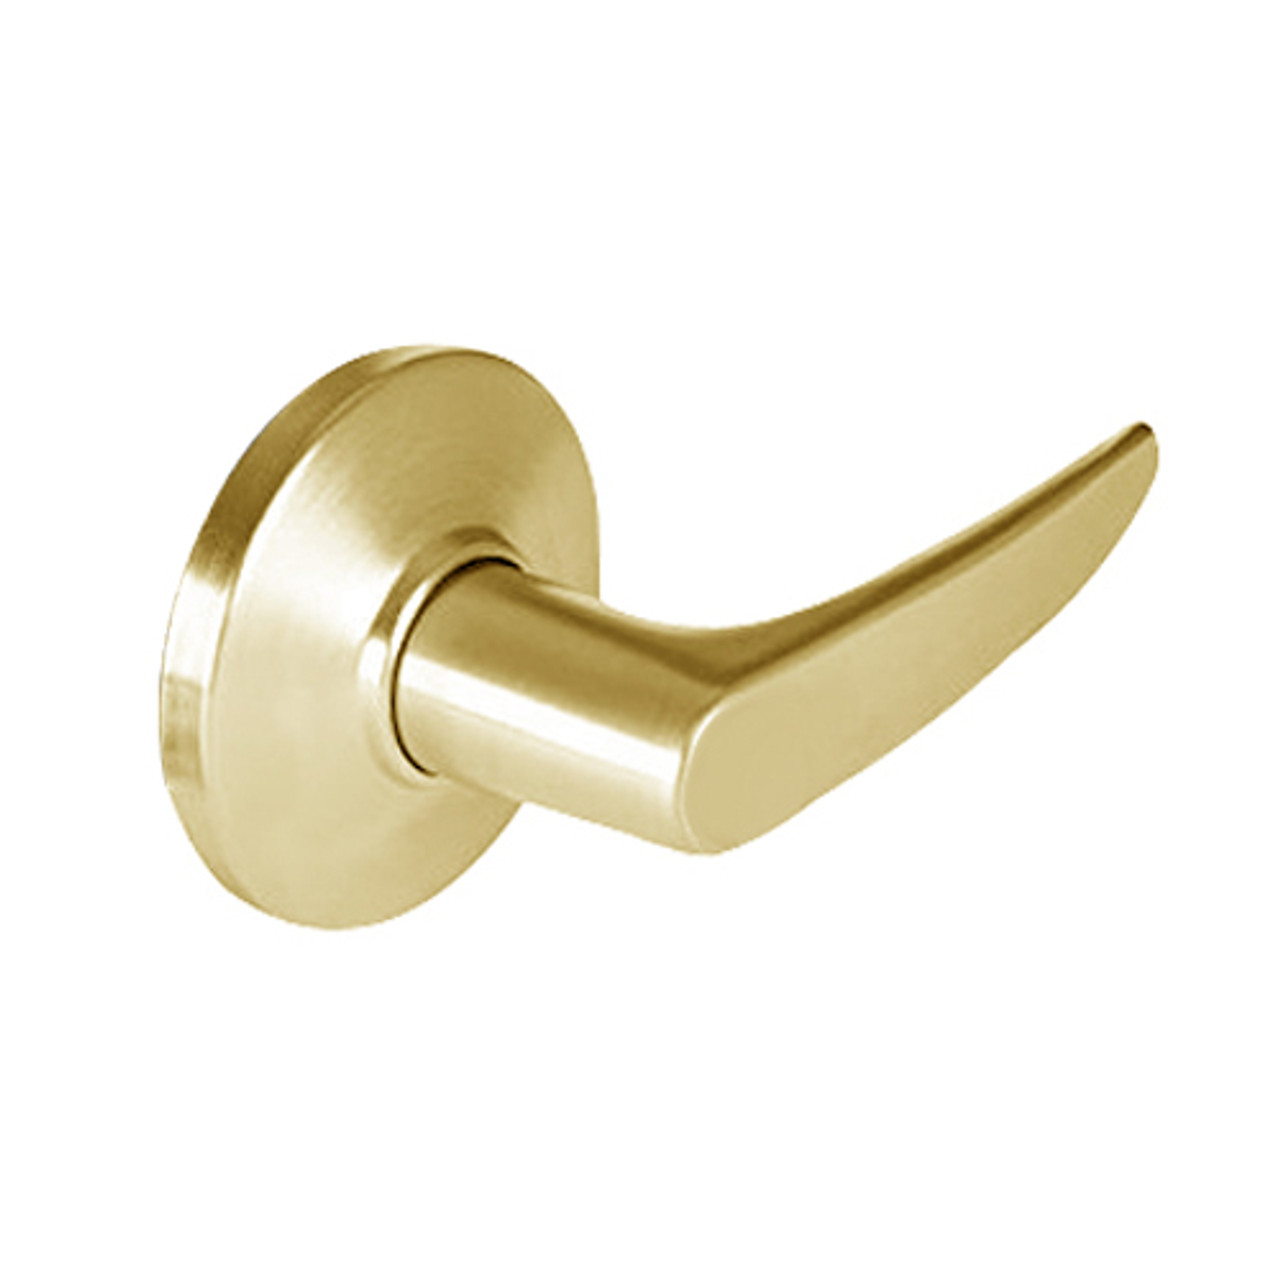 9K30M16DS3605 Best 9K Series Communicating Heavy Duty Cylindrical Lever Locks with Curved Without Return Lever Design in Bright Brass